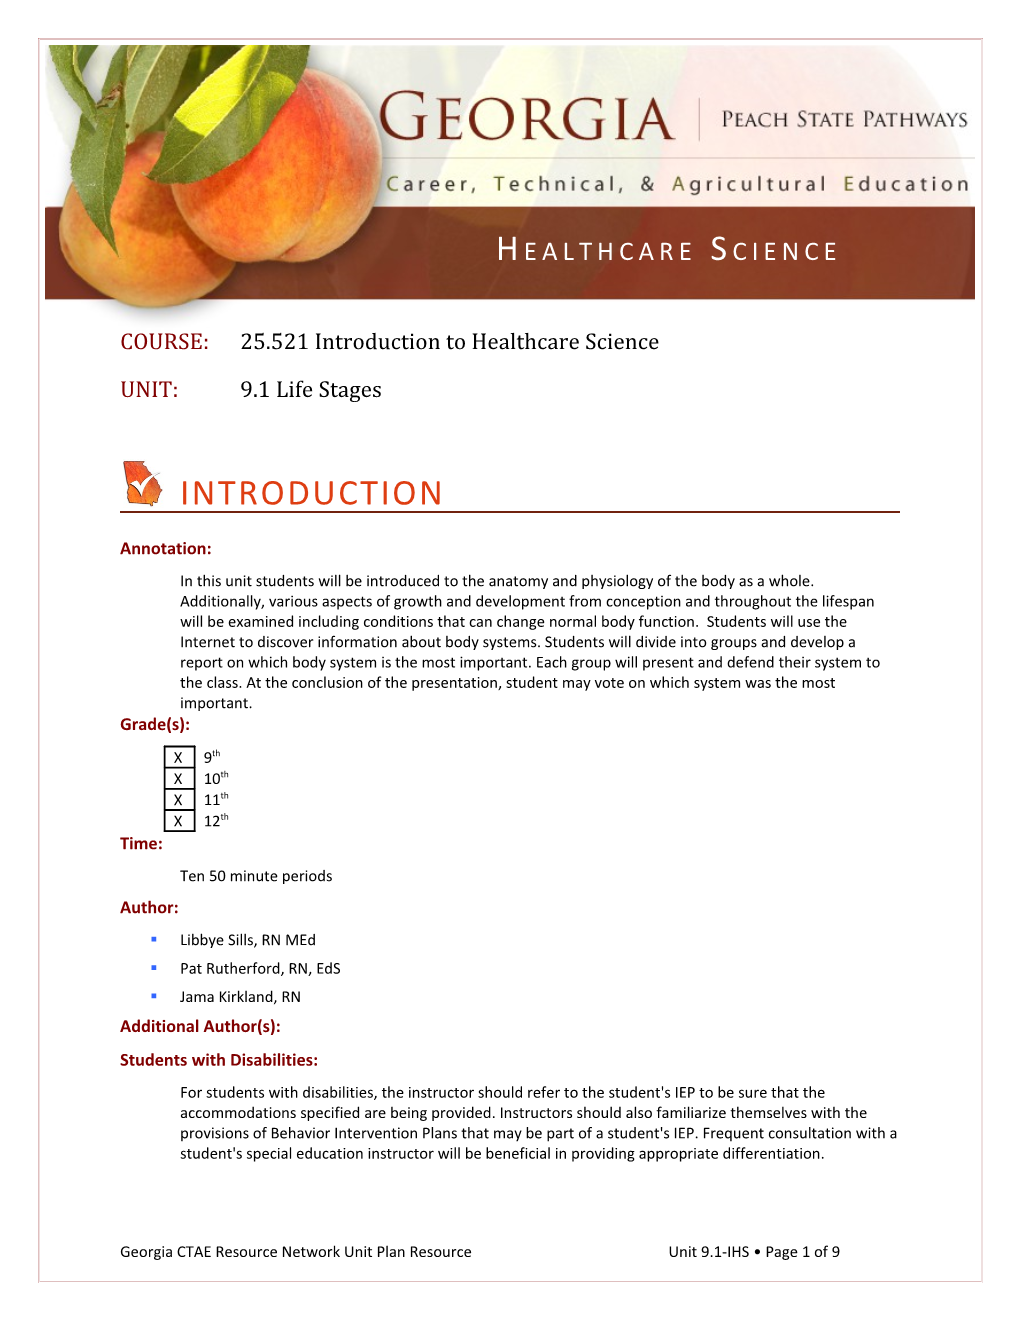 COURSE: 25.521 Introduction to Healthcare Science